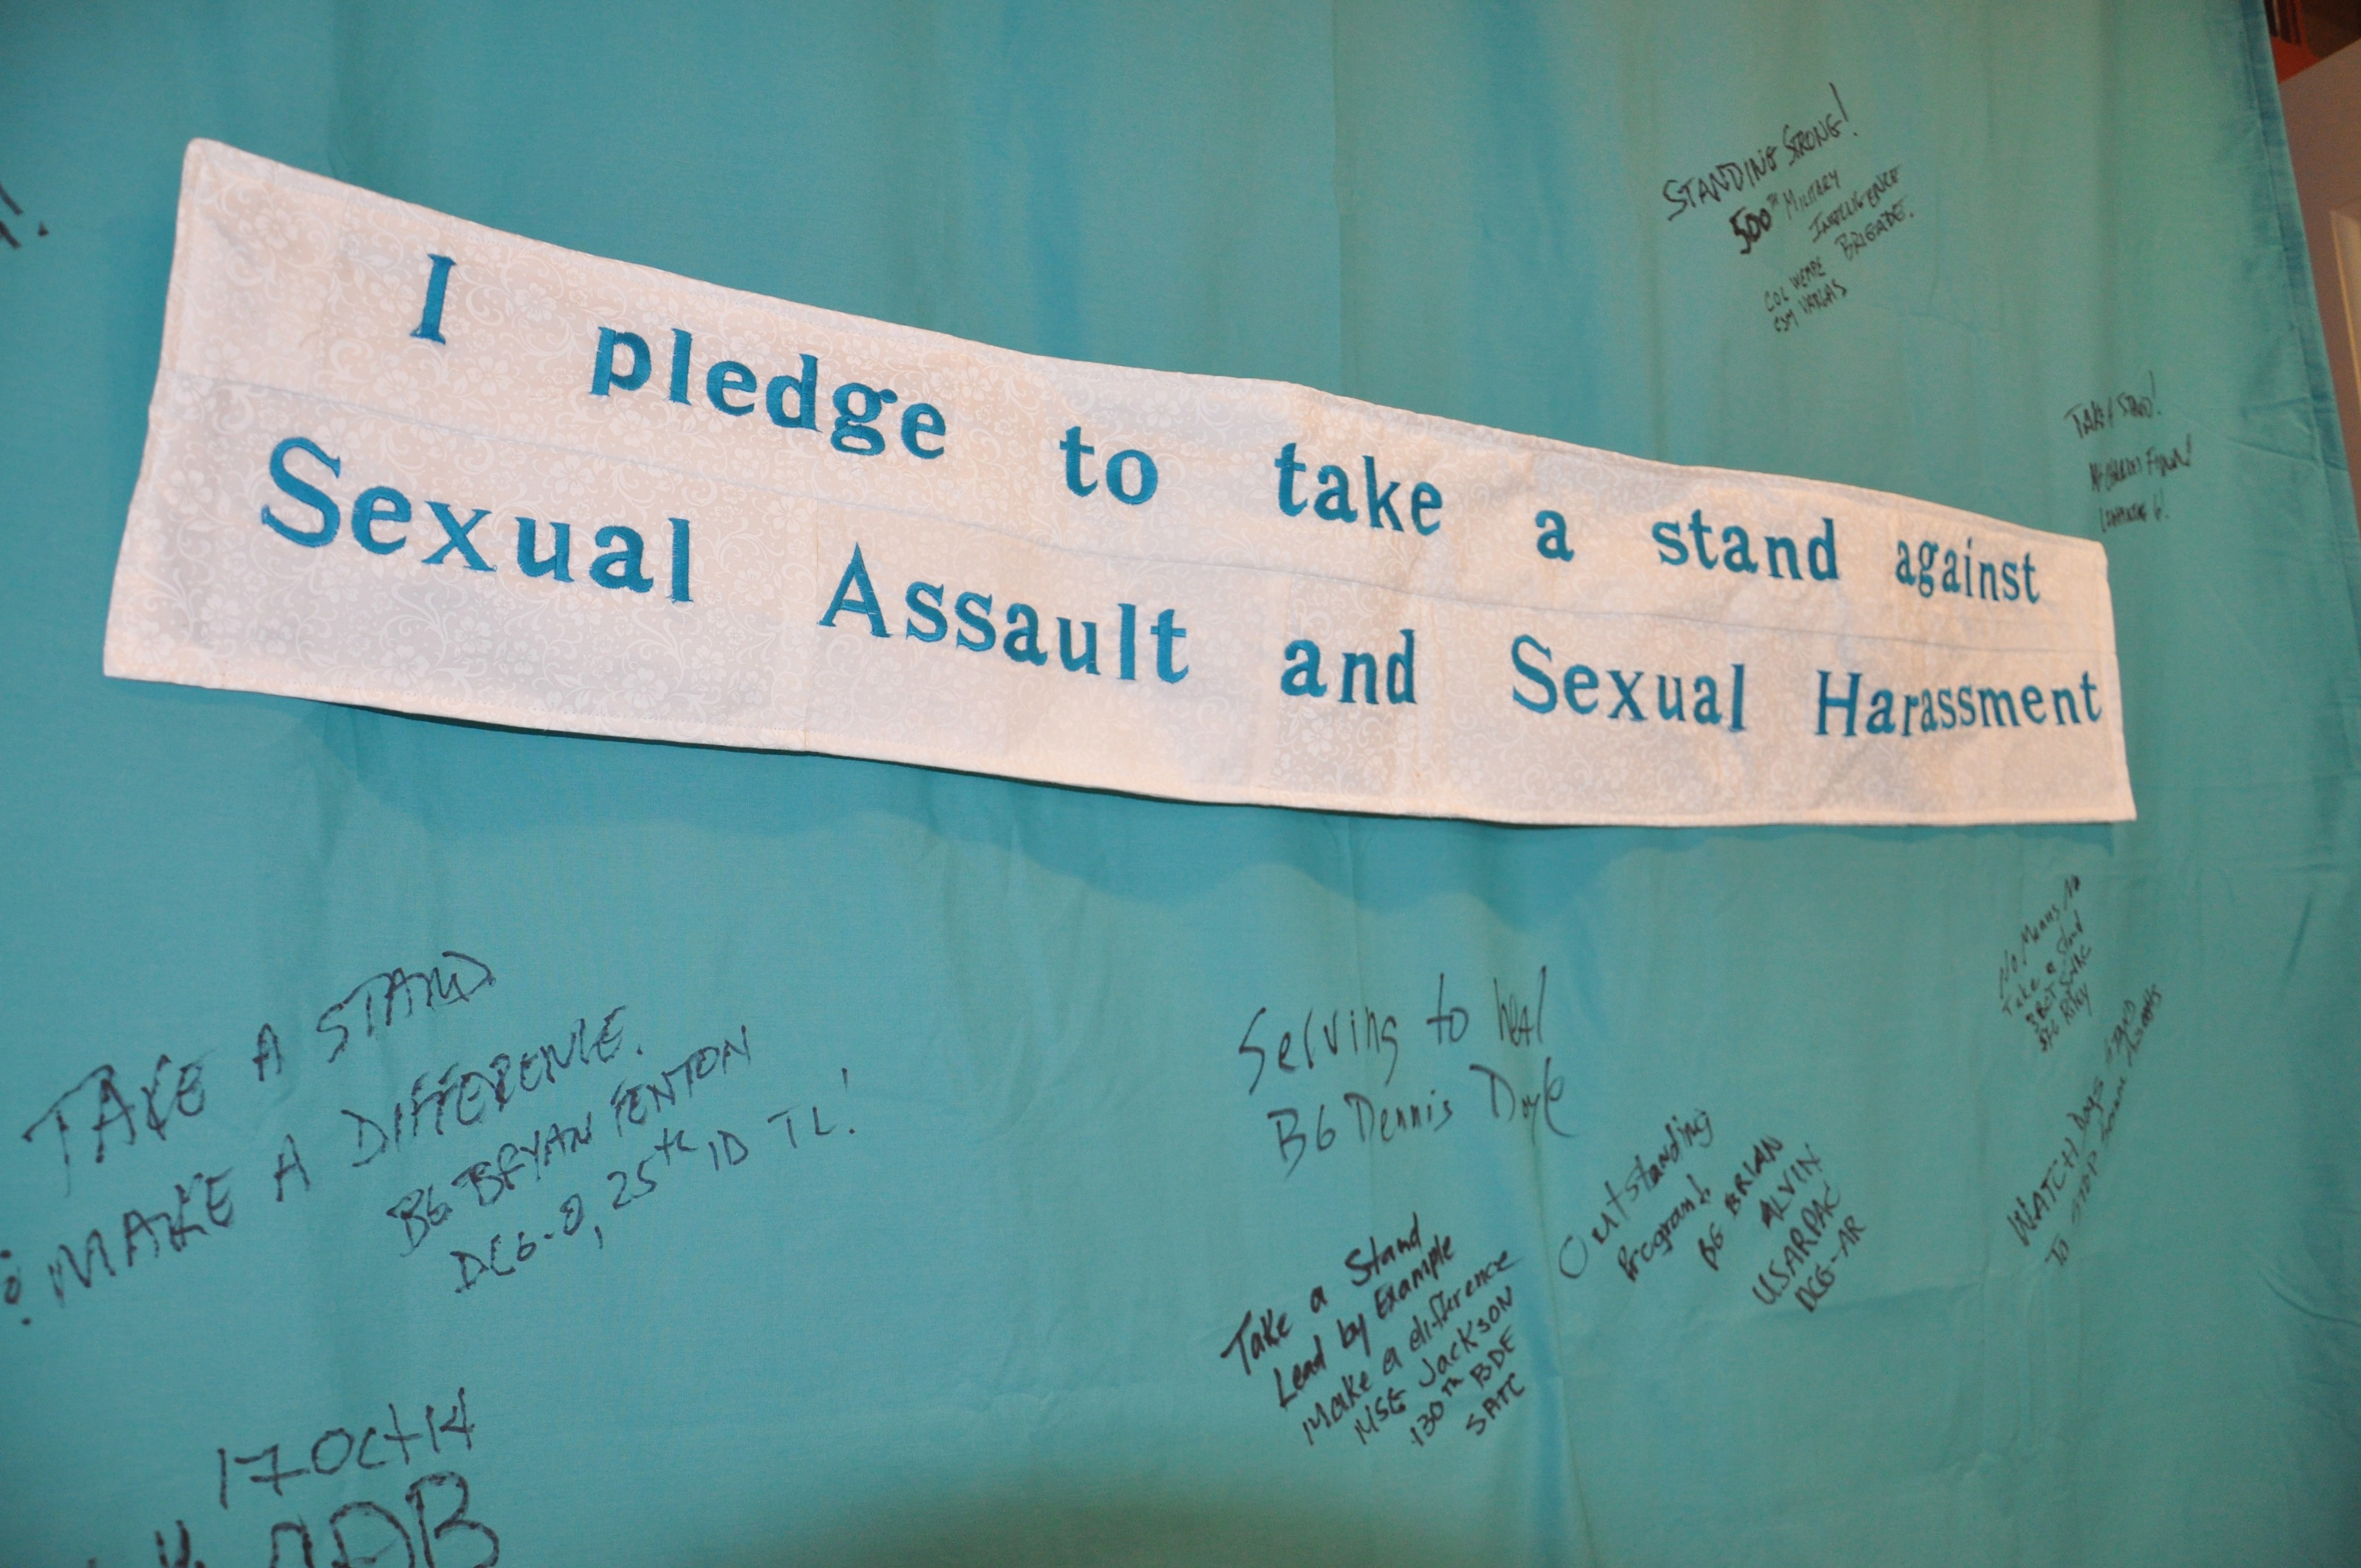 Believing Assisting Sexual Assault Victims Is Important Article 